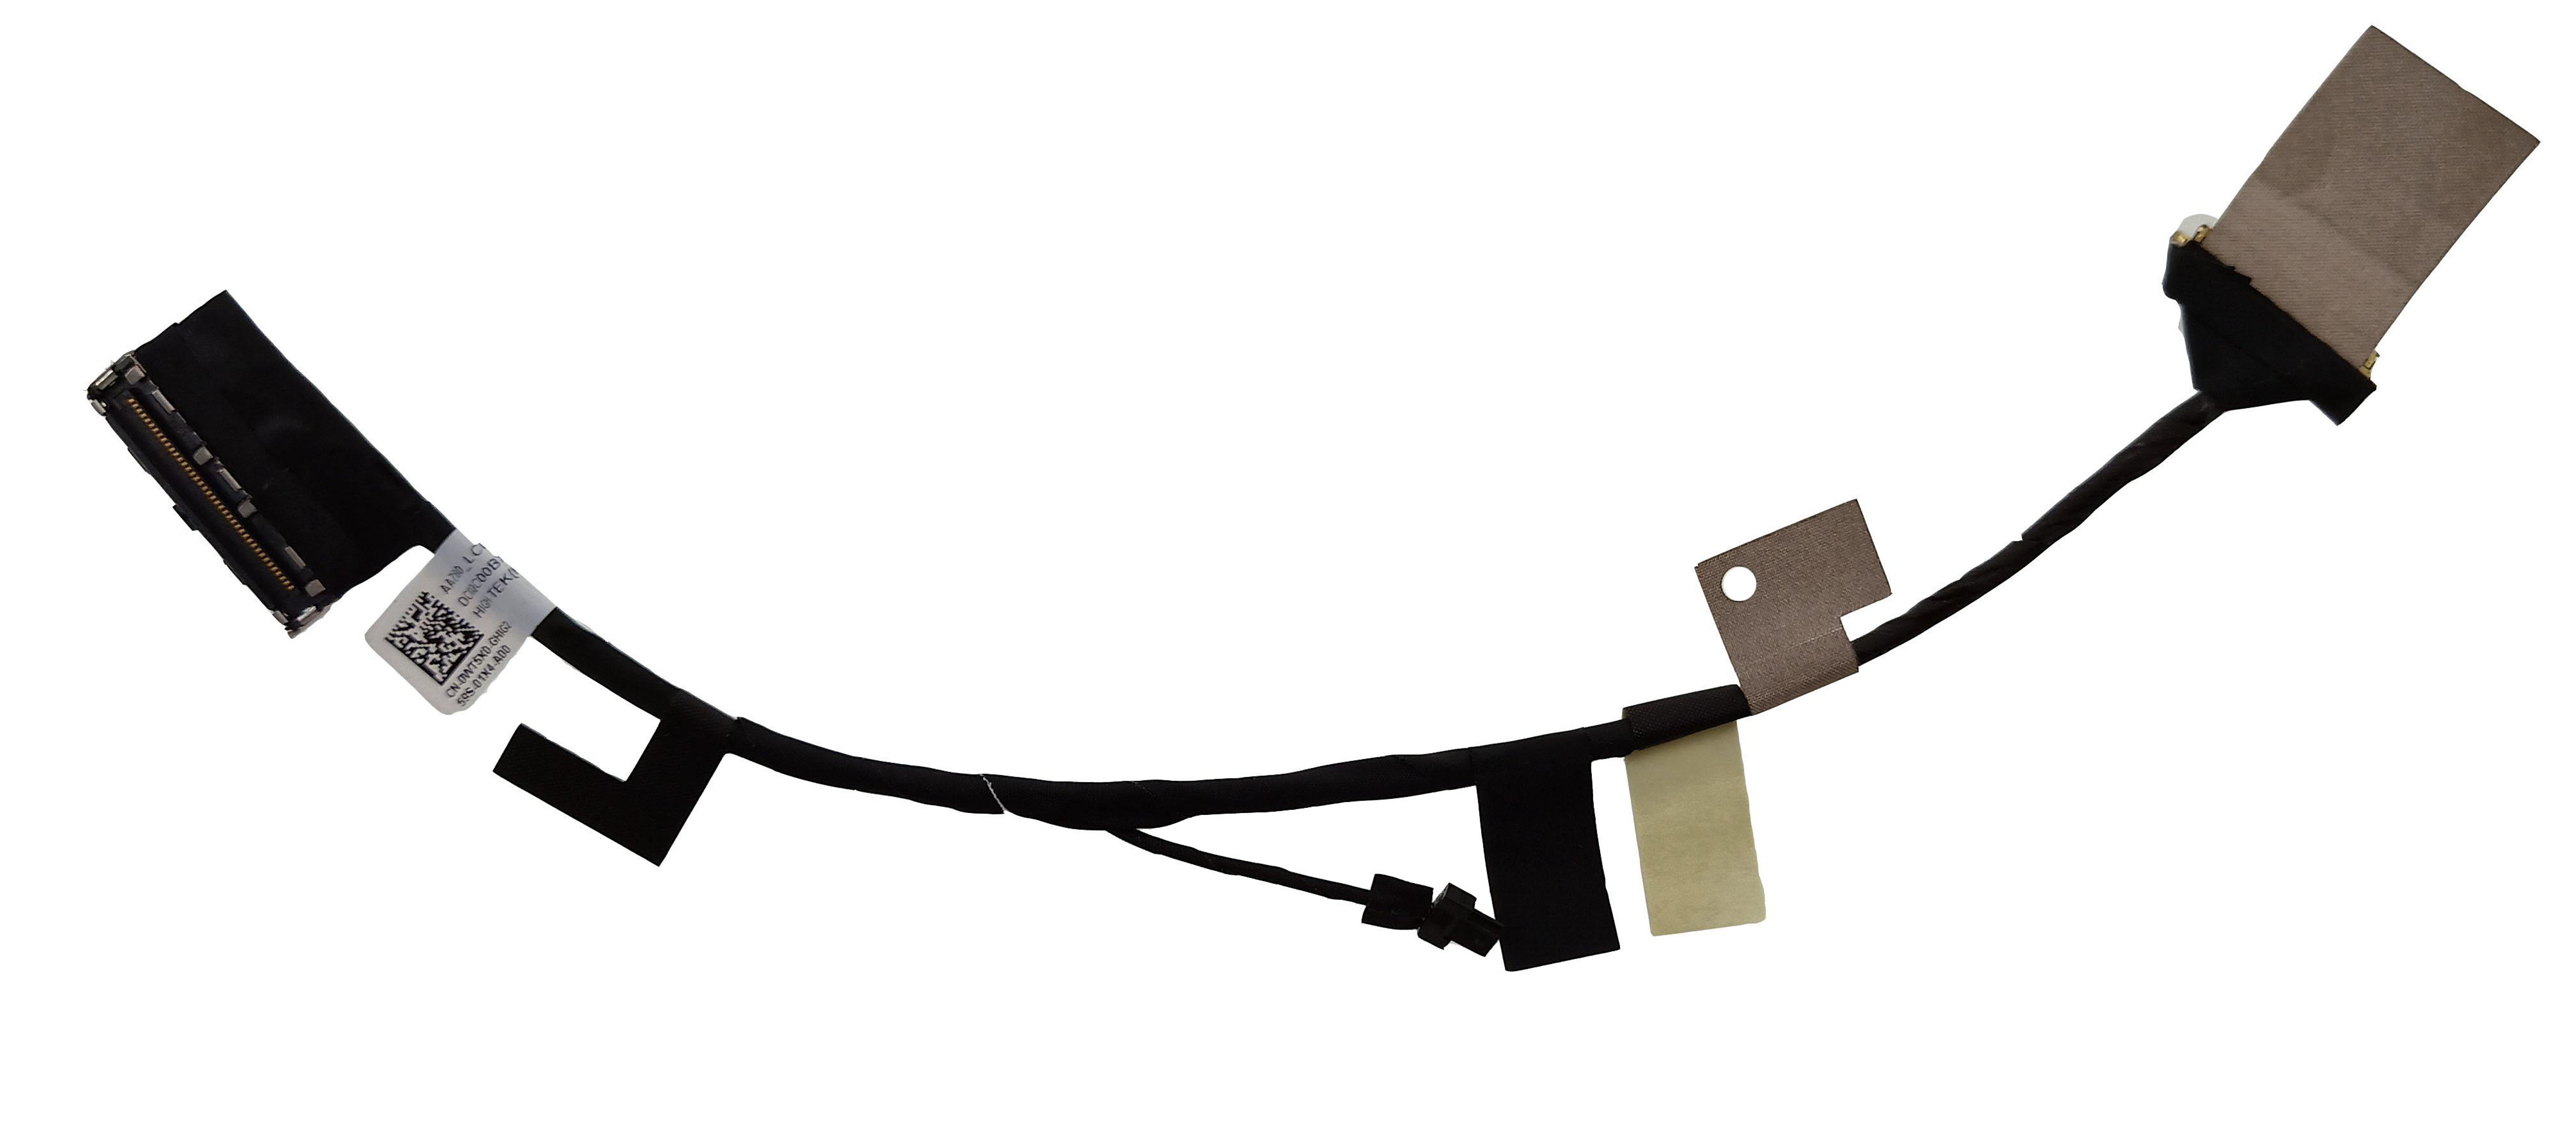 New Dell XPS 13 9350 9360 0WT5X0 WT5X0 AAZ80_EDP_CABLE_QHD DC02C00BX10 LED LCD Screen LVDS VIDEO Display Cable